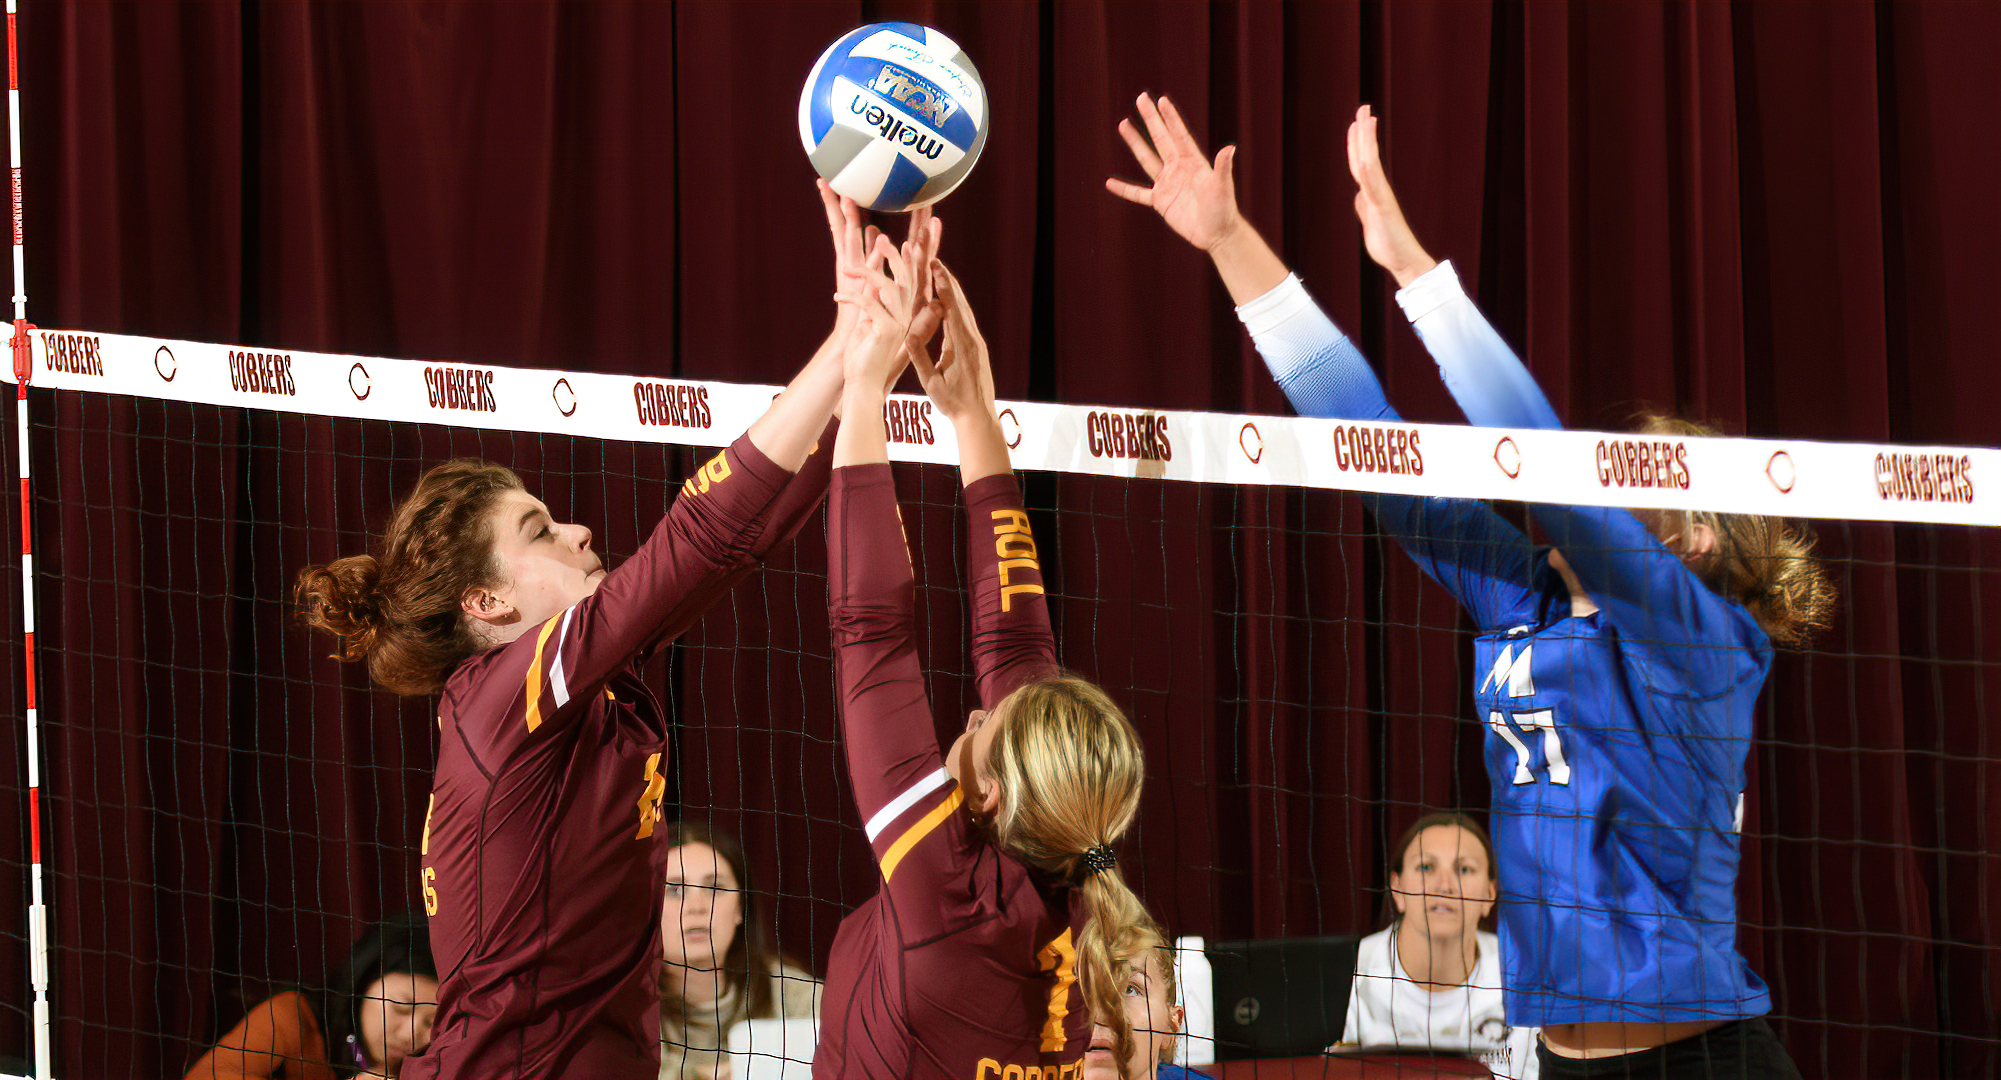 Kendra Wiggs (L) led the Cobbers with 11 kills and 4.0 blocks in the team's sweep at St. Mary's. Kaia Lill (#7) had a team-high 31 assists.